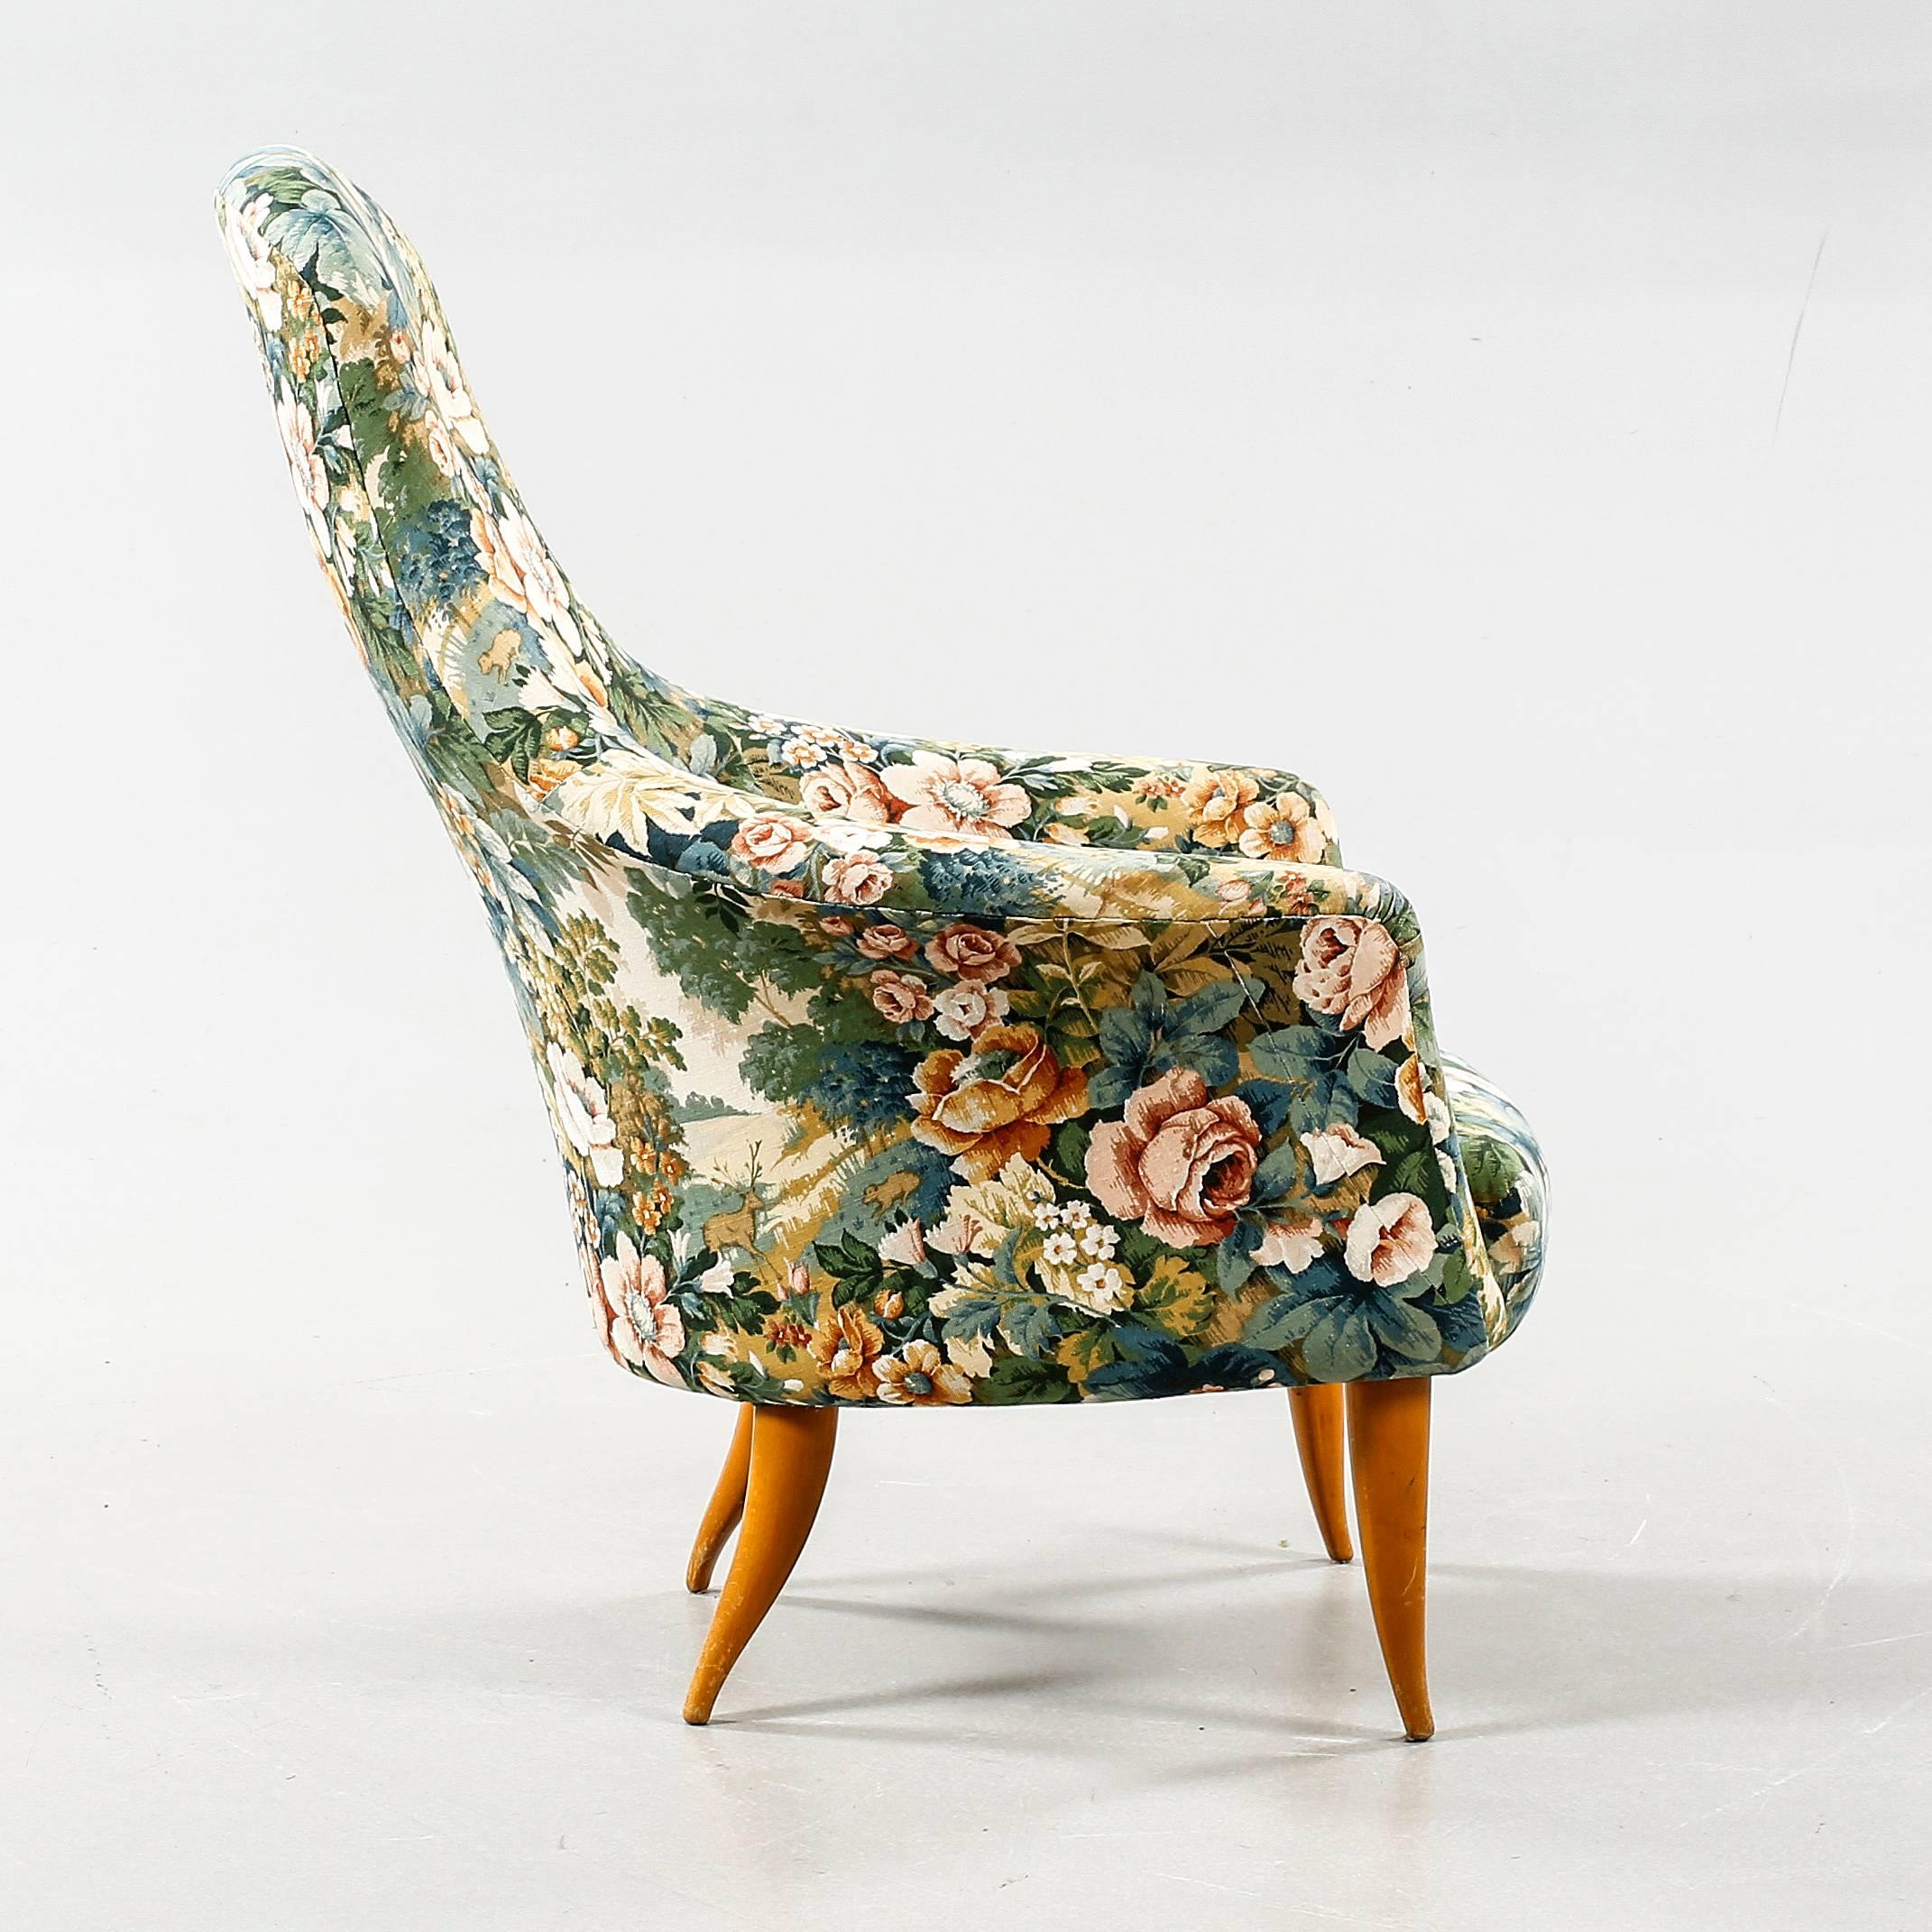 Armchair 'Large Adam' designed by Kerstin Horlin-Holmquist for Nordiska Kompaniet, in Sweden, 1958.

Vintage wool floral pattern upholstery.

Note: We have also available a 'Little Adam' armchair with the same vintage upholstery.
 